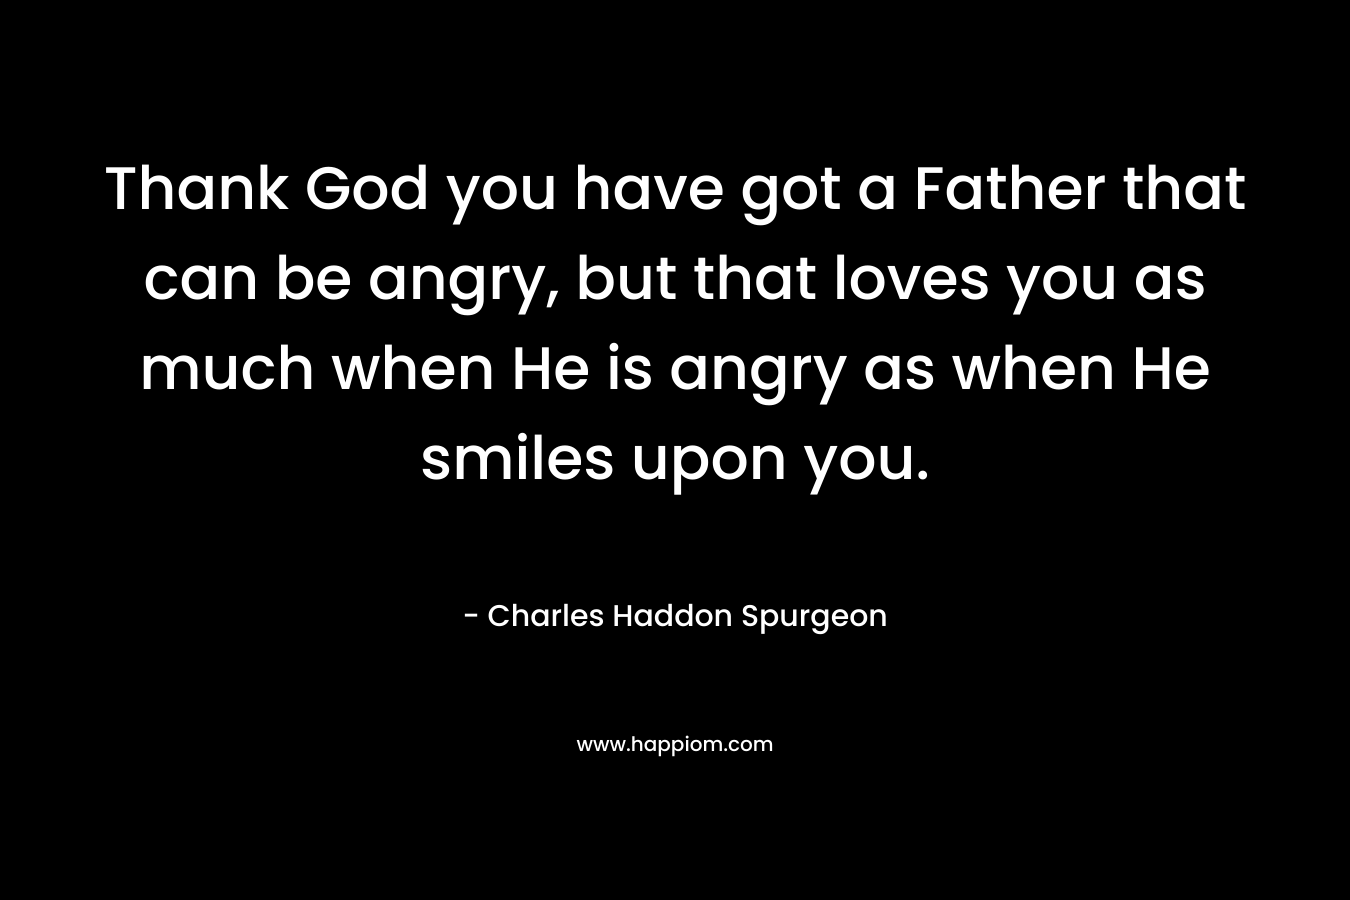 Thank God you have got a Father that can be angry, but that loves you as much when He is angry as when He smiles upon you.